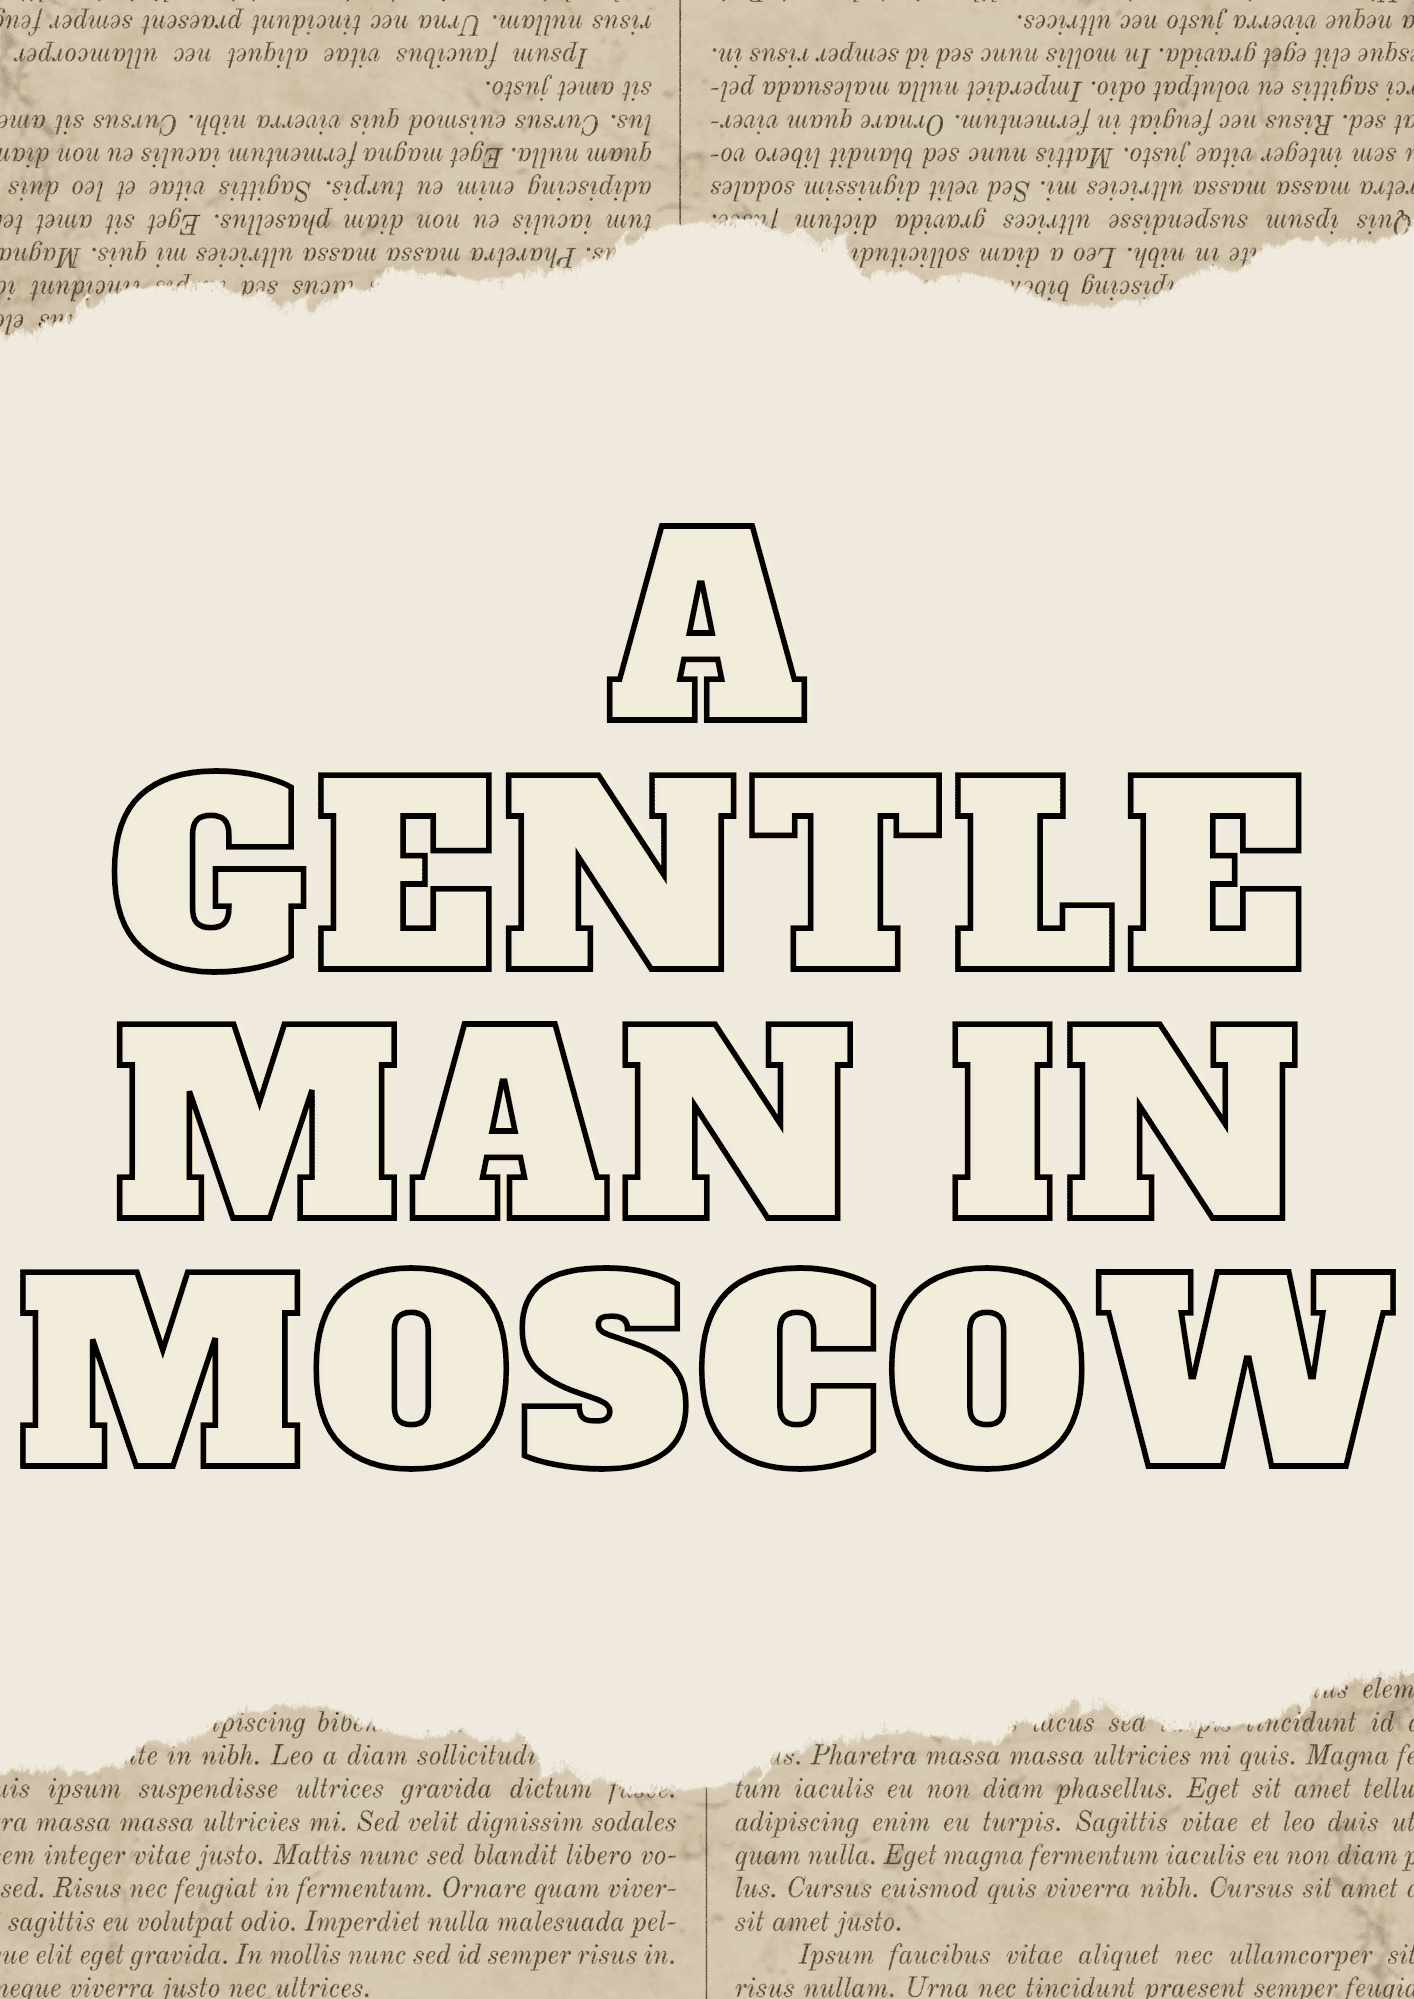 A Gentleman in Moscow: History, Charm, and Endearing Characters